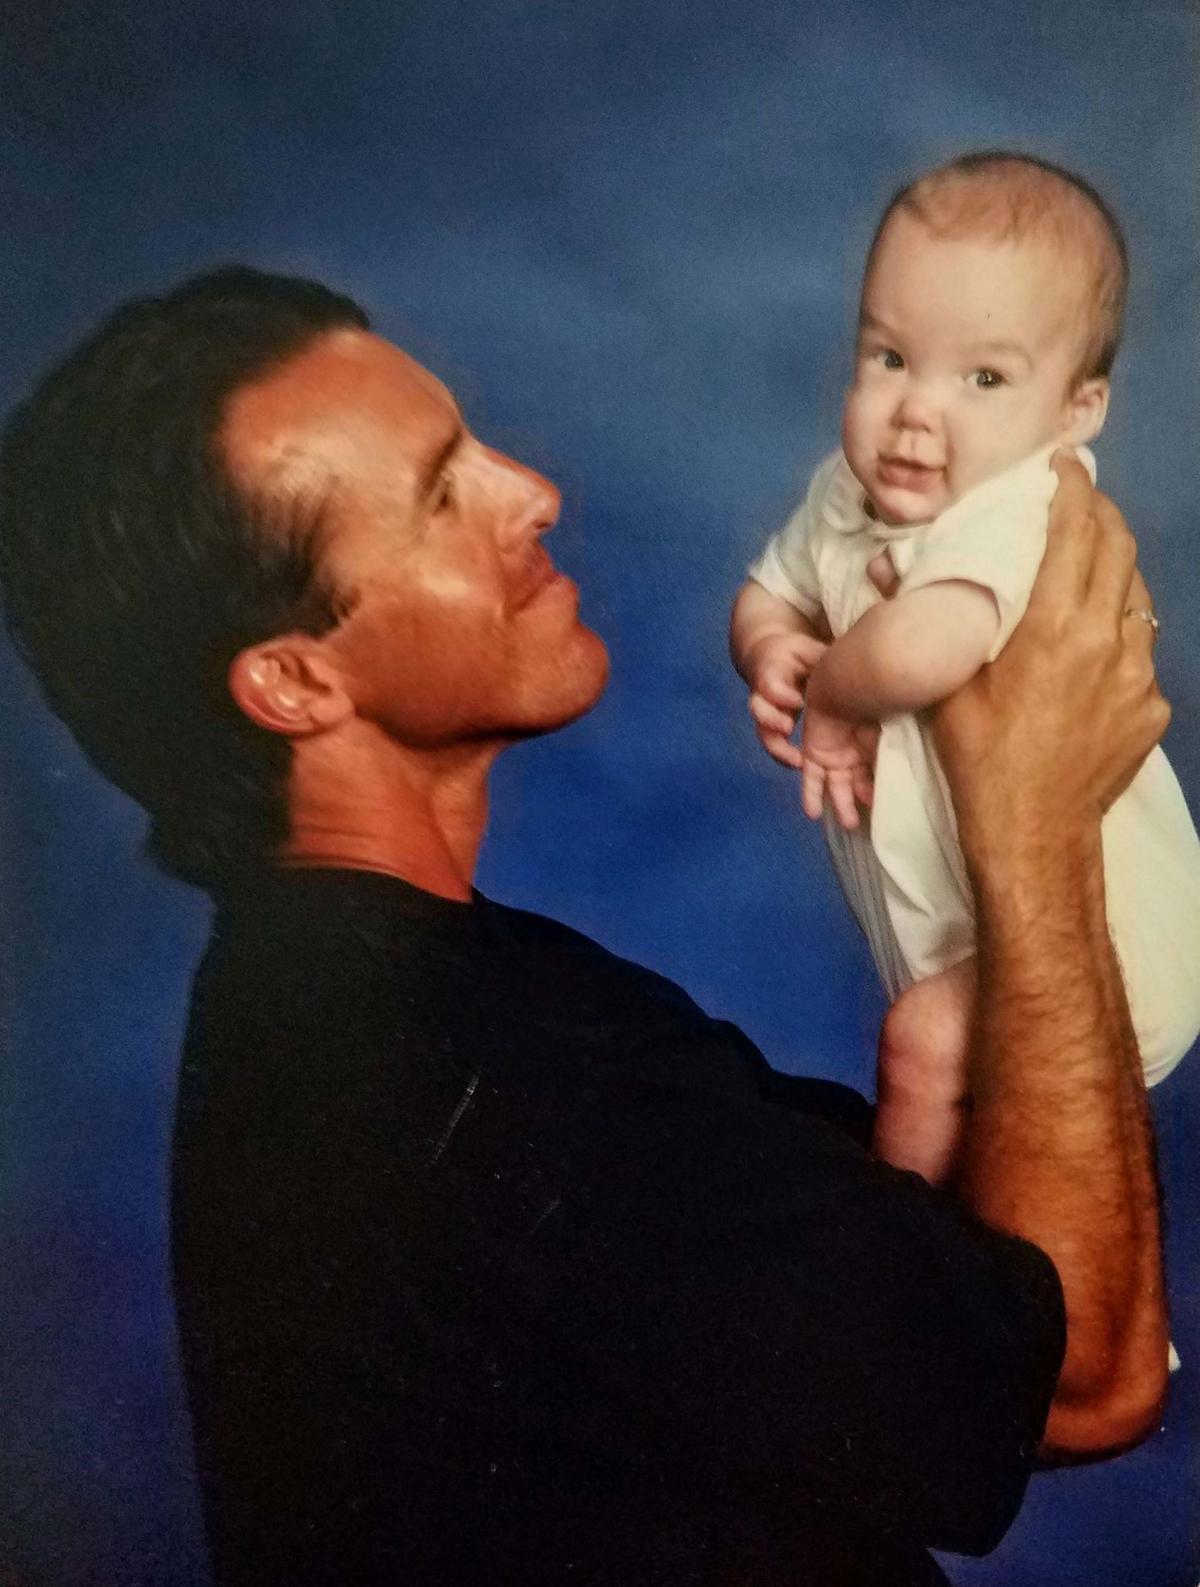 Randy Kemp, 55, from Carlsbad, California, gave his son, Noah Anderson, 20, up for adoption when he was just 6 months old. (Caters News)